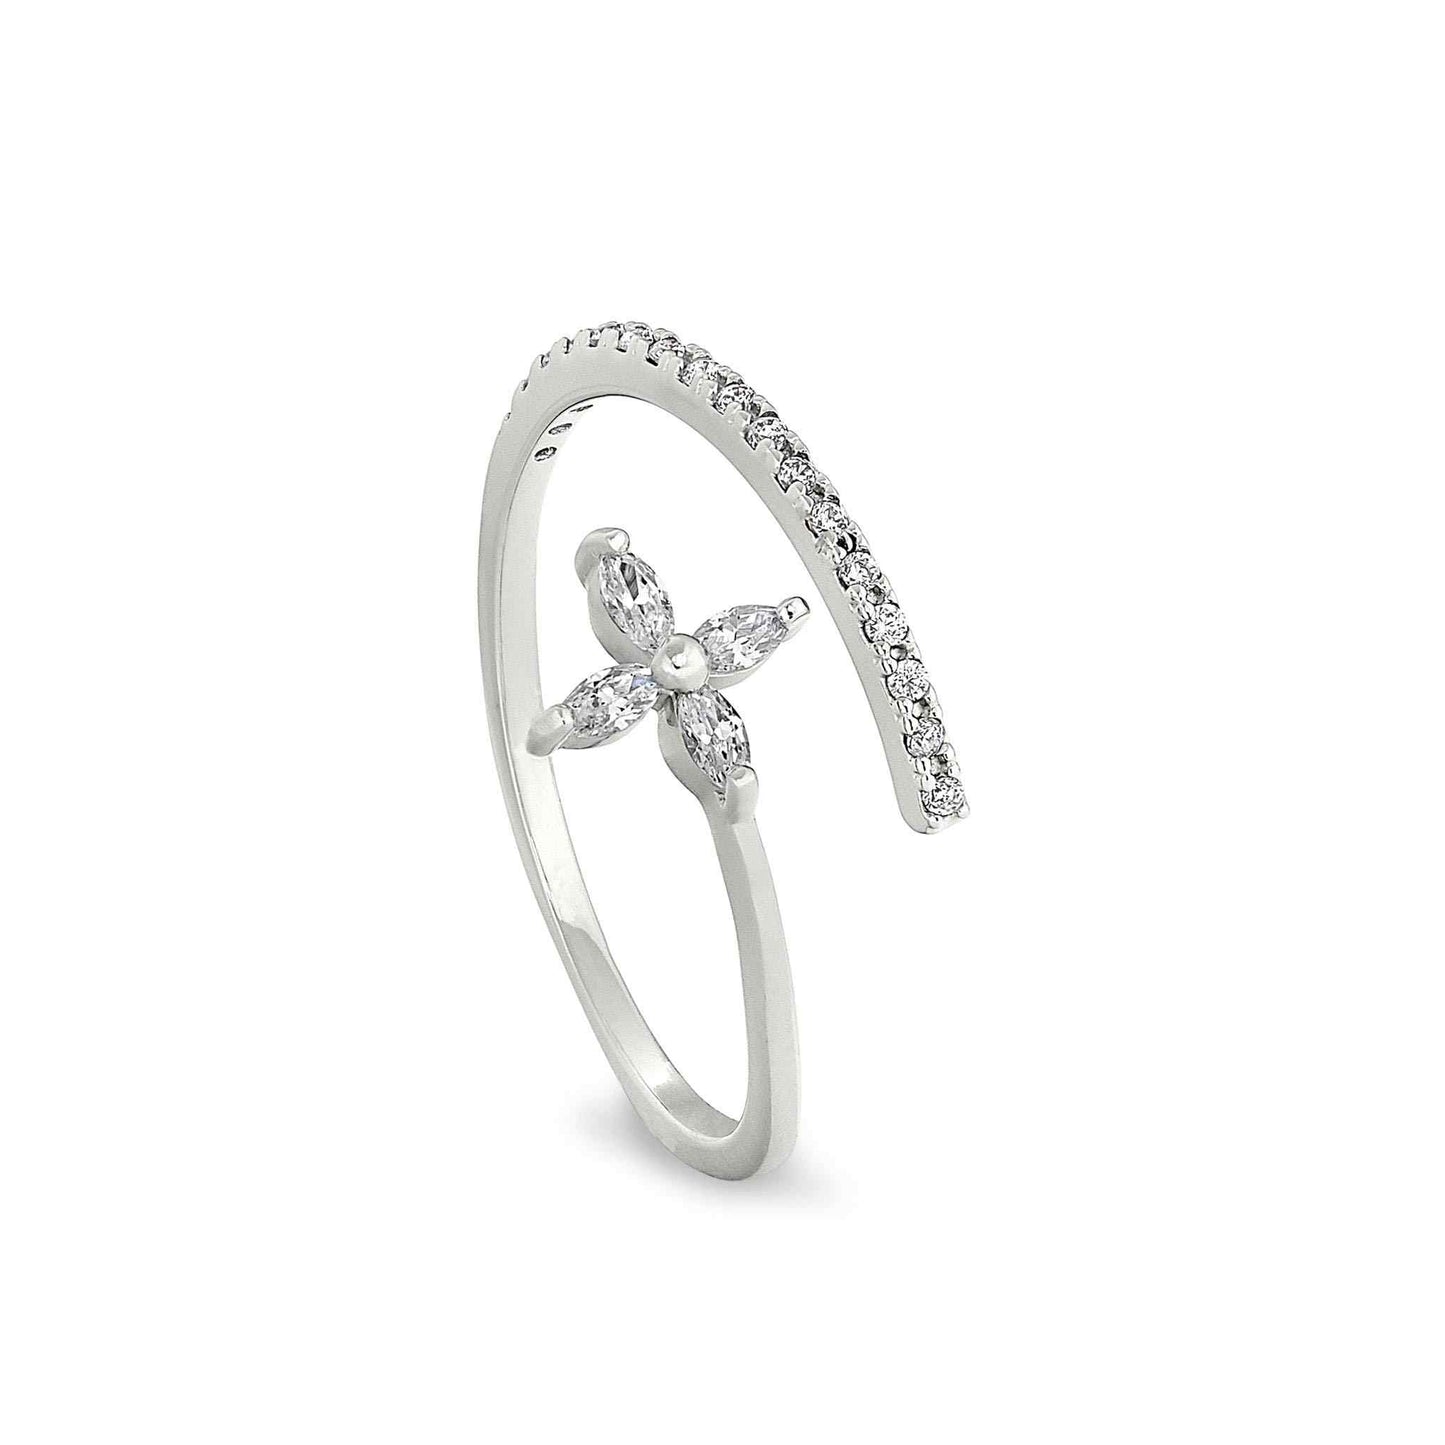 A adjustable twist flower ring with simulated diamonds displayed on a neutral white background.